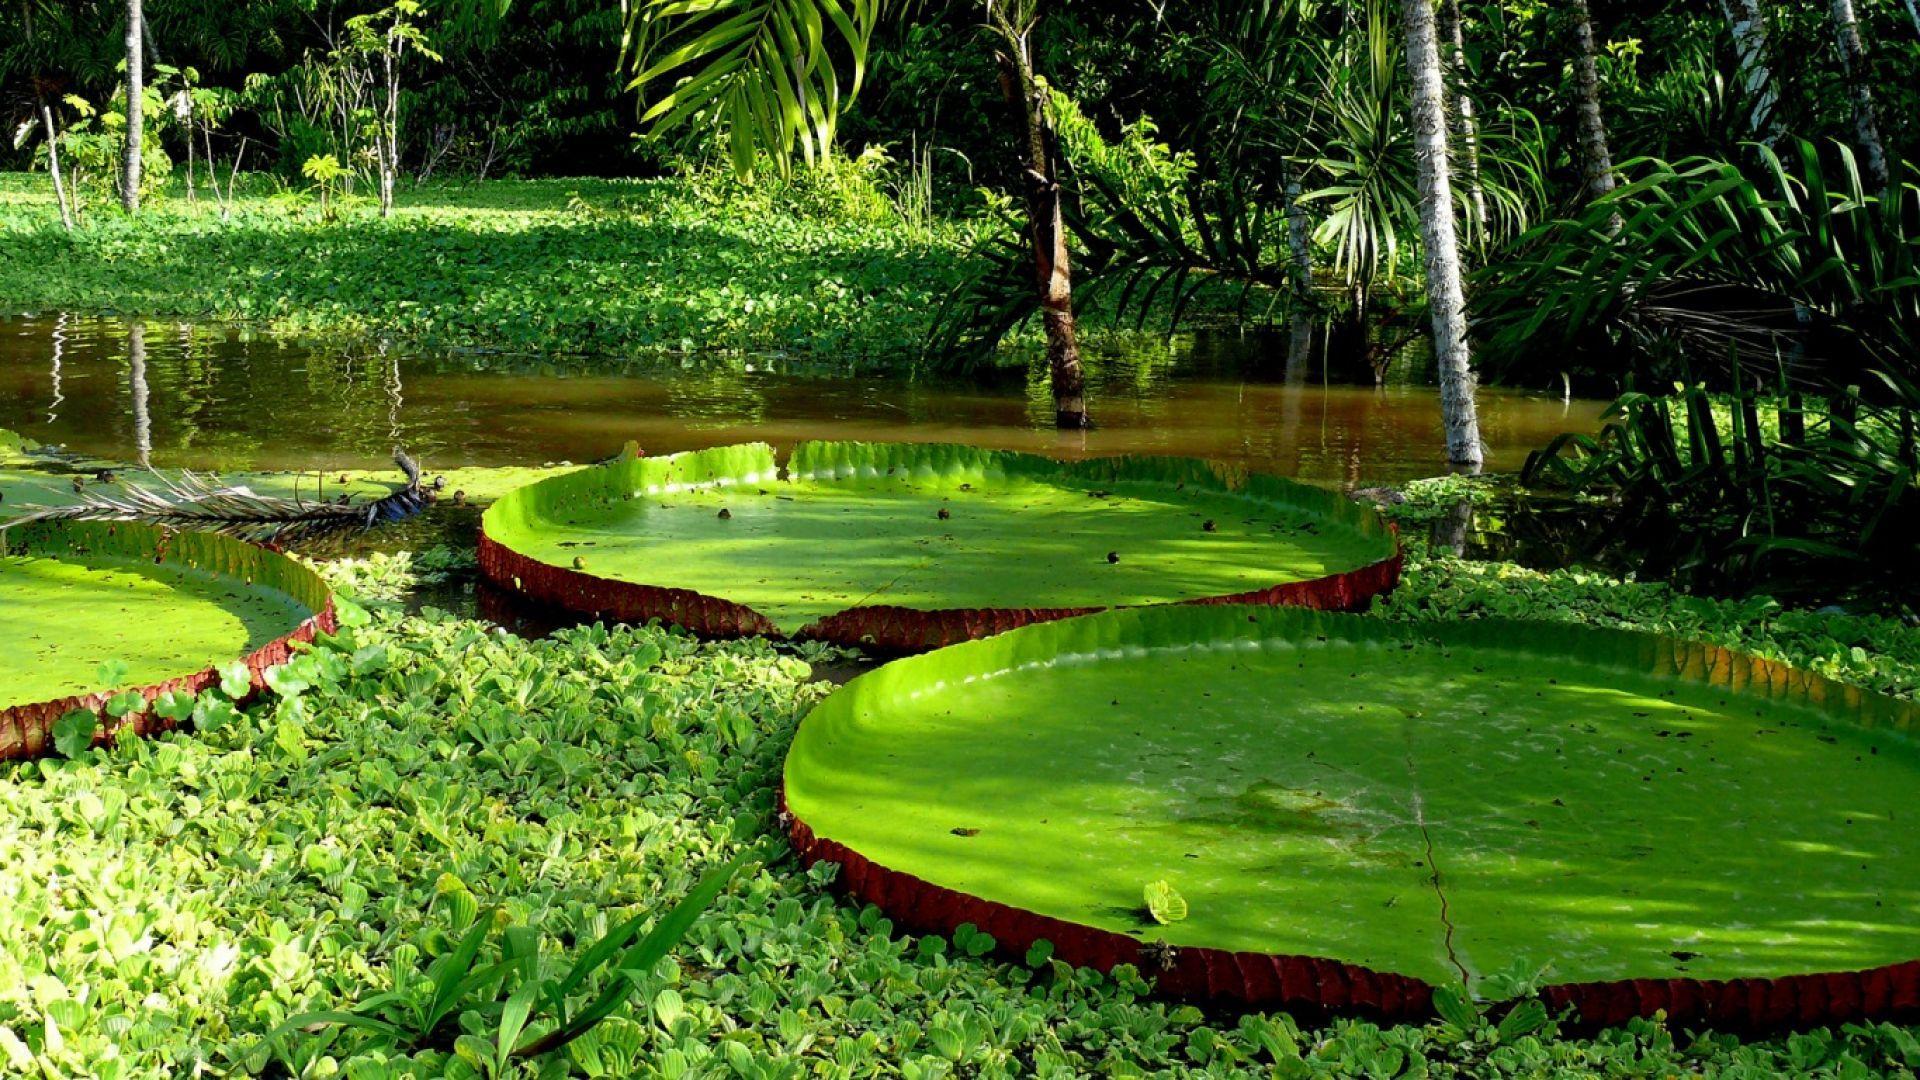 Giant Lily Pads. HD Nature Wallpaper for Mobile and Desktop